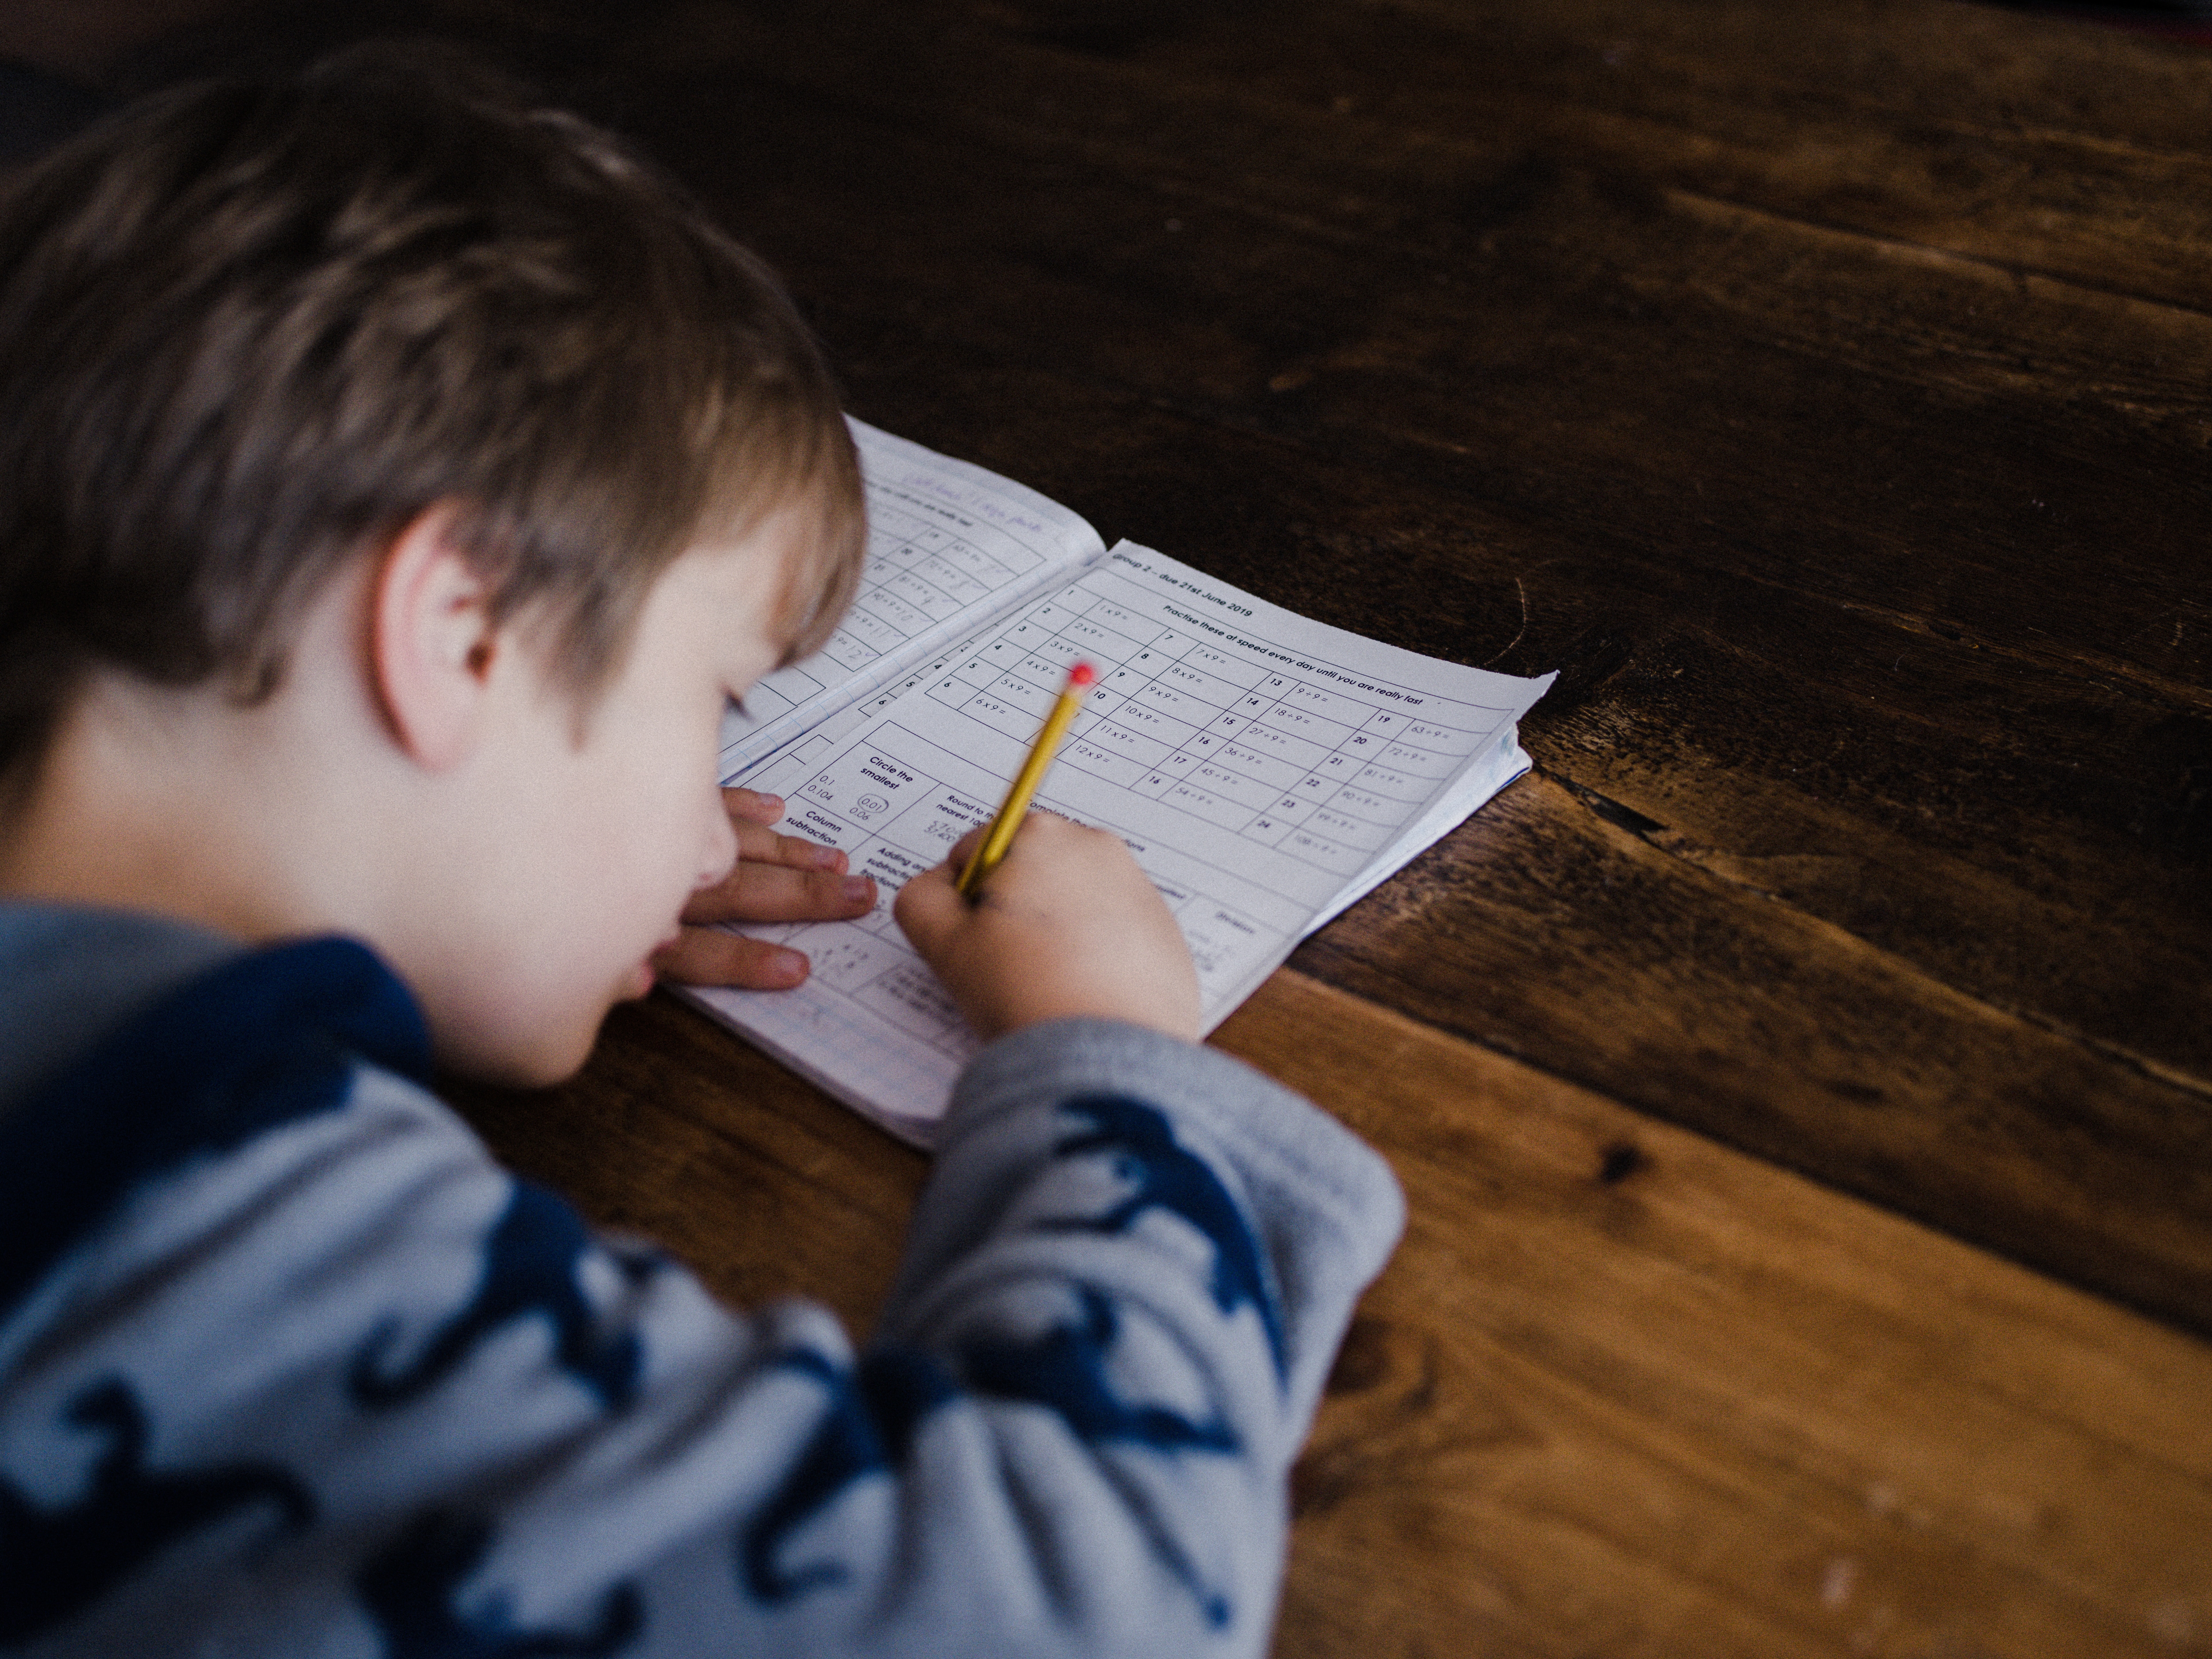 a young child studies more effectively after participating in youth & family services